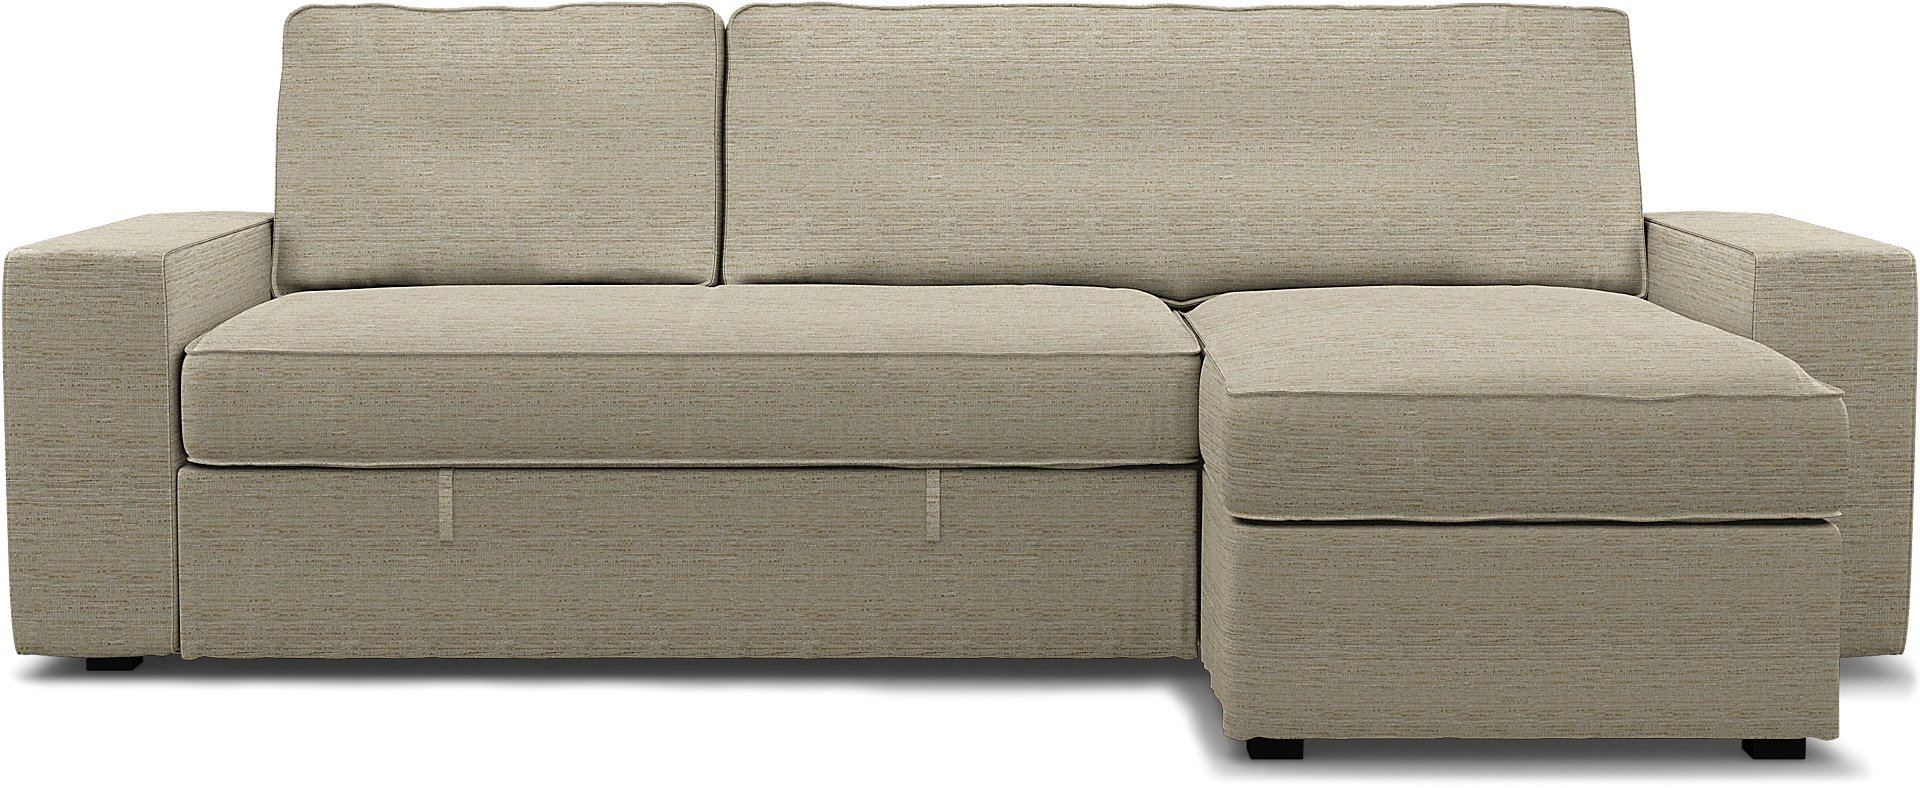 IKEA - Vilasund sofa bed with chaise cover, Light Sand, Boucle & Texture - Bemz